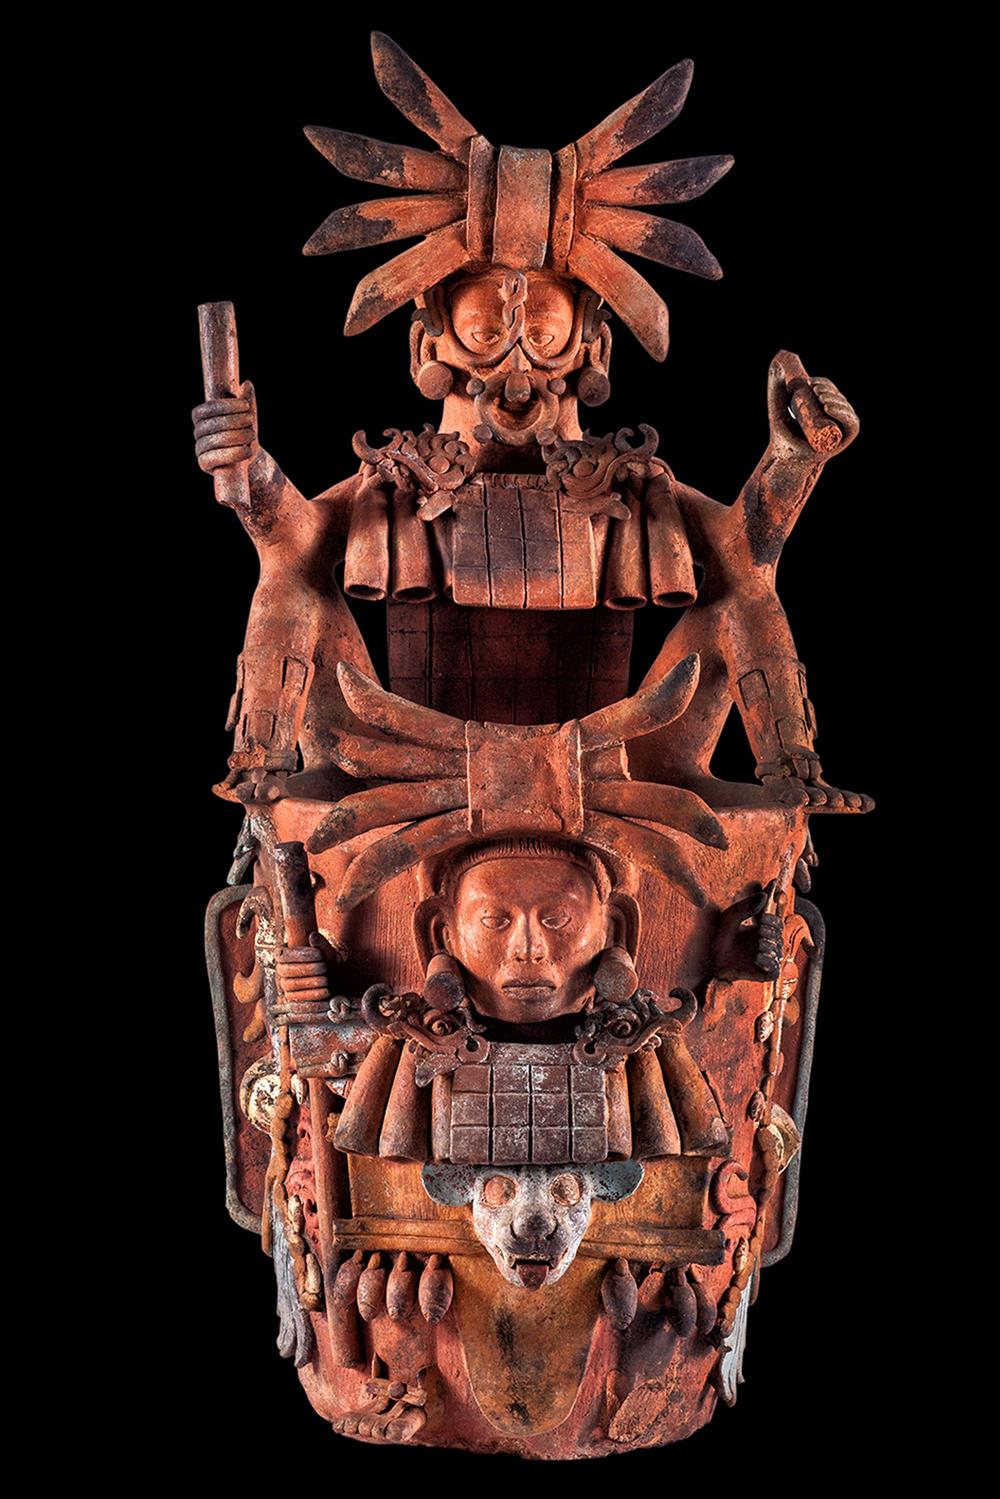 Clay incense burner, late Classic Maya (600-900), from Comitán, Mexico, now housed at the regional museum of Anthropology and History of Chiapas, Tuxtla Gutiérrez, Mexico.jpg